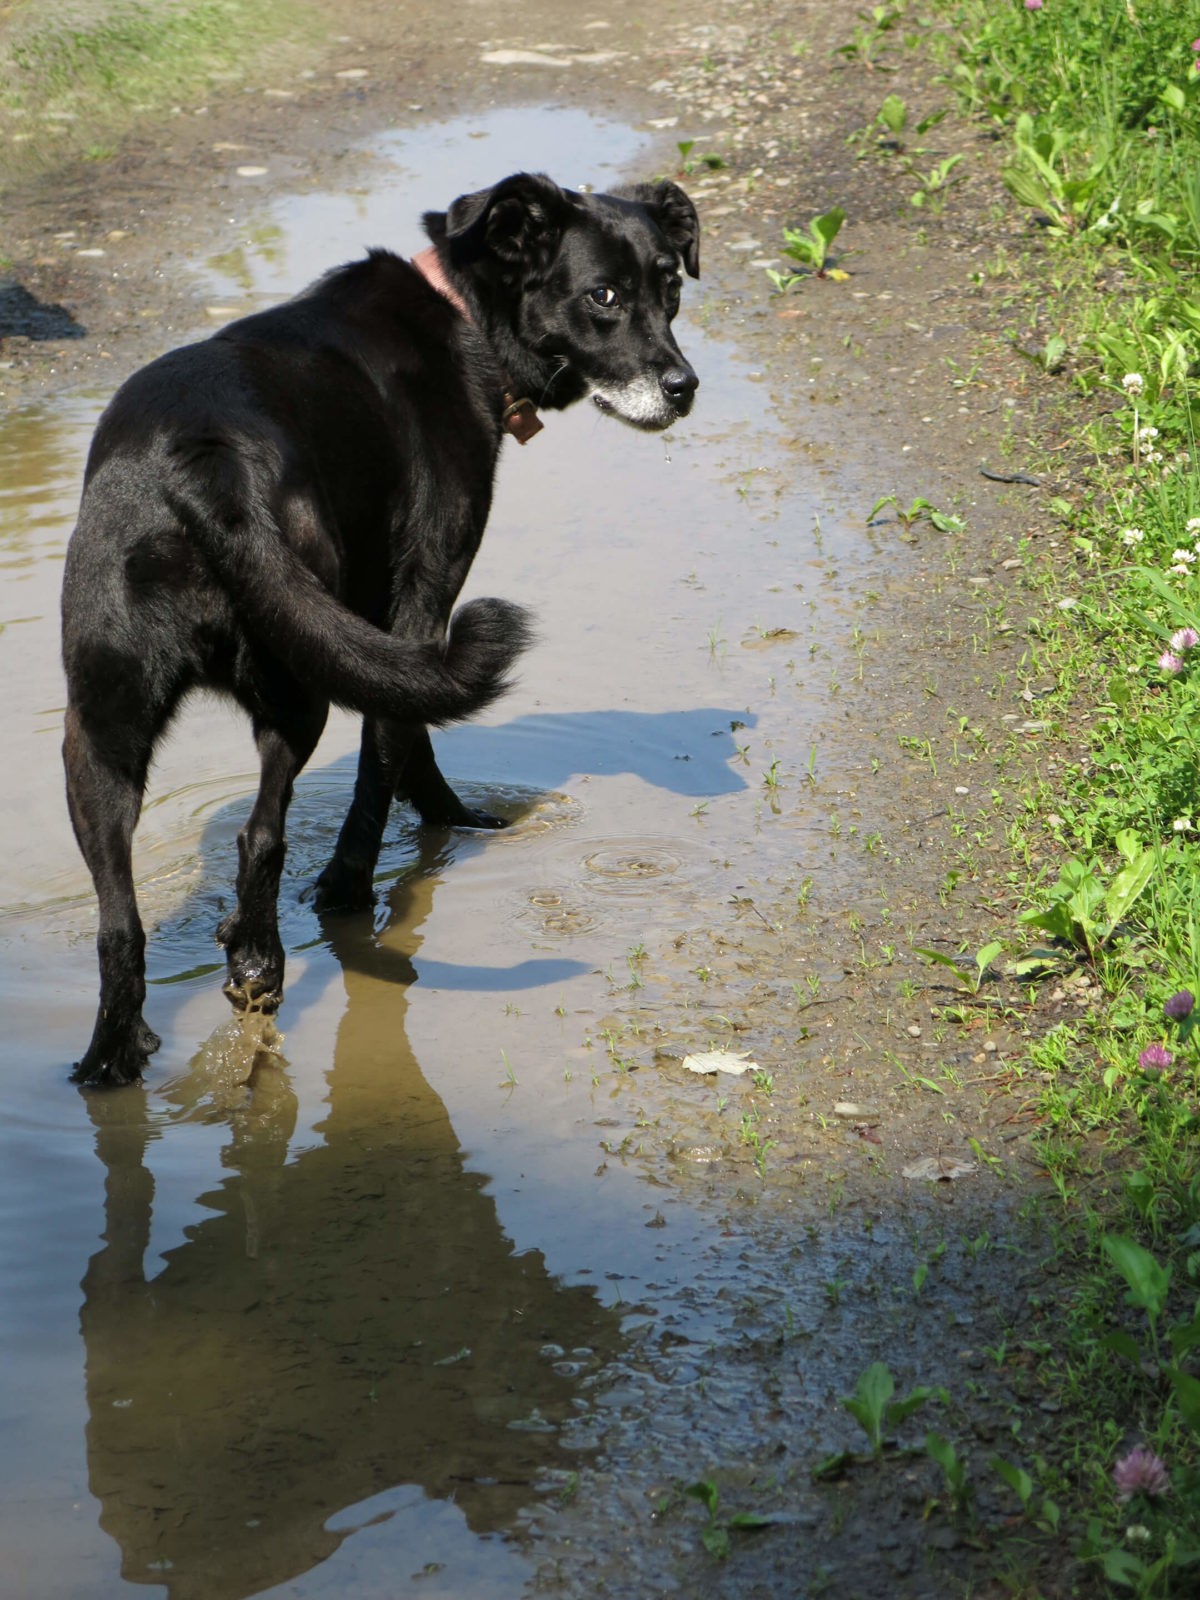 Tory, the dog that loves water, photographed by Robin Botie of Ithaca, New York.